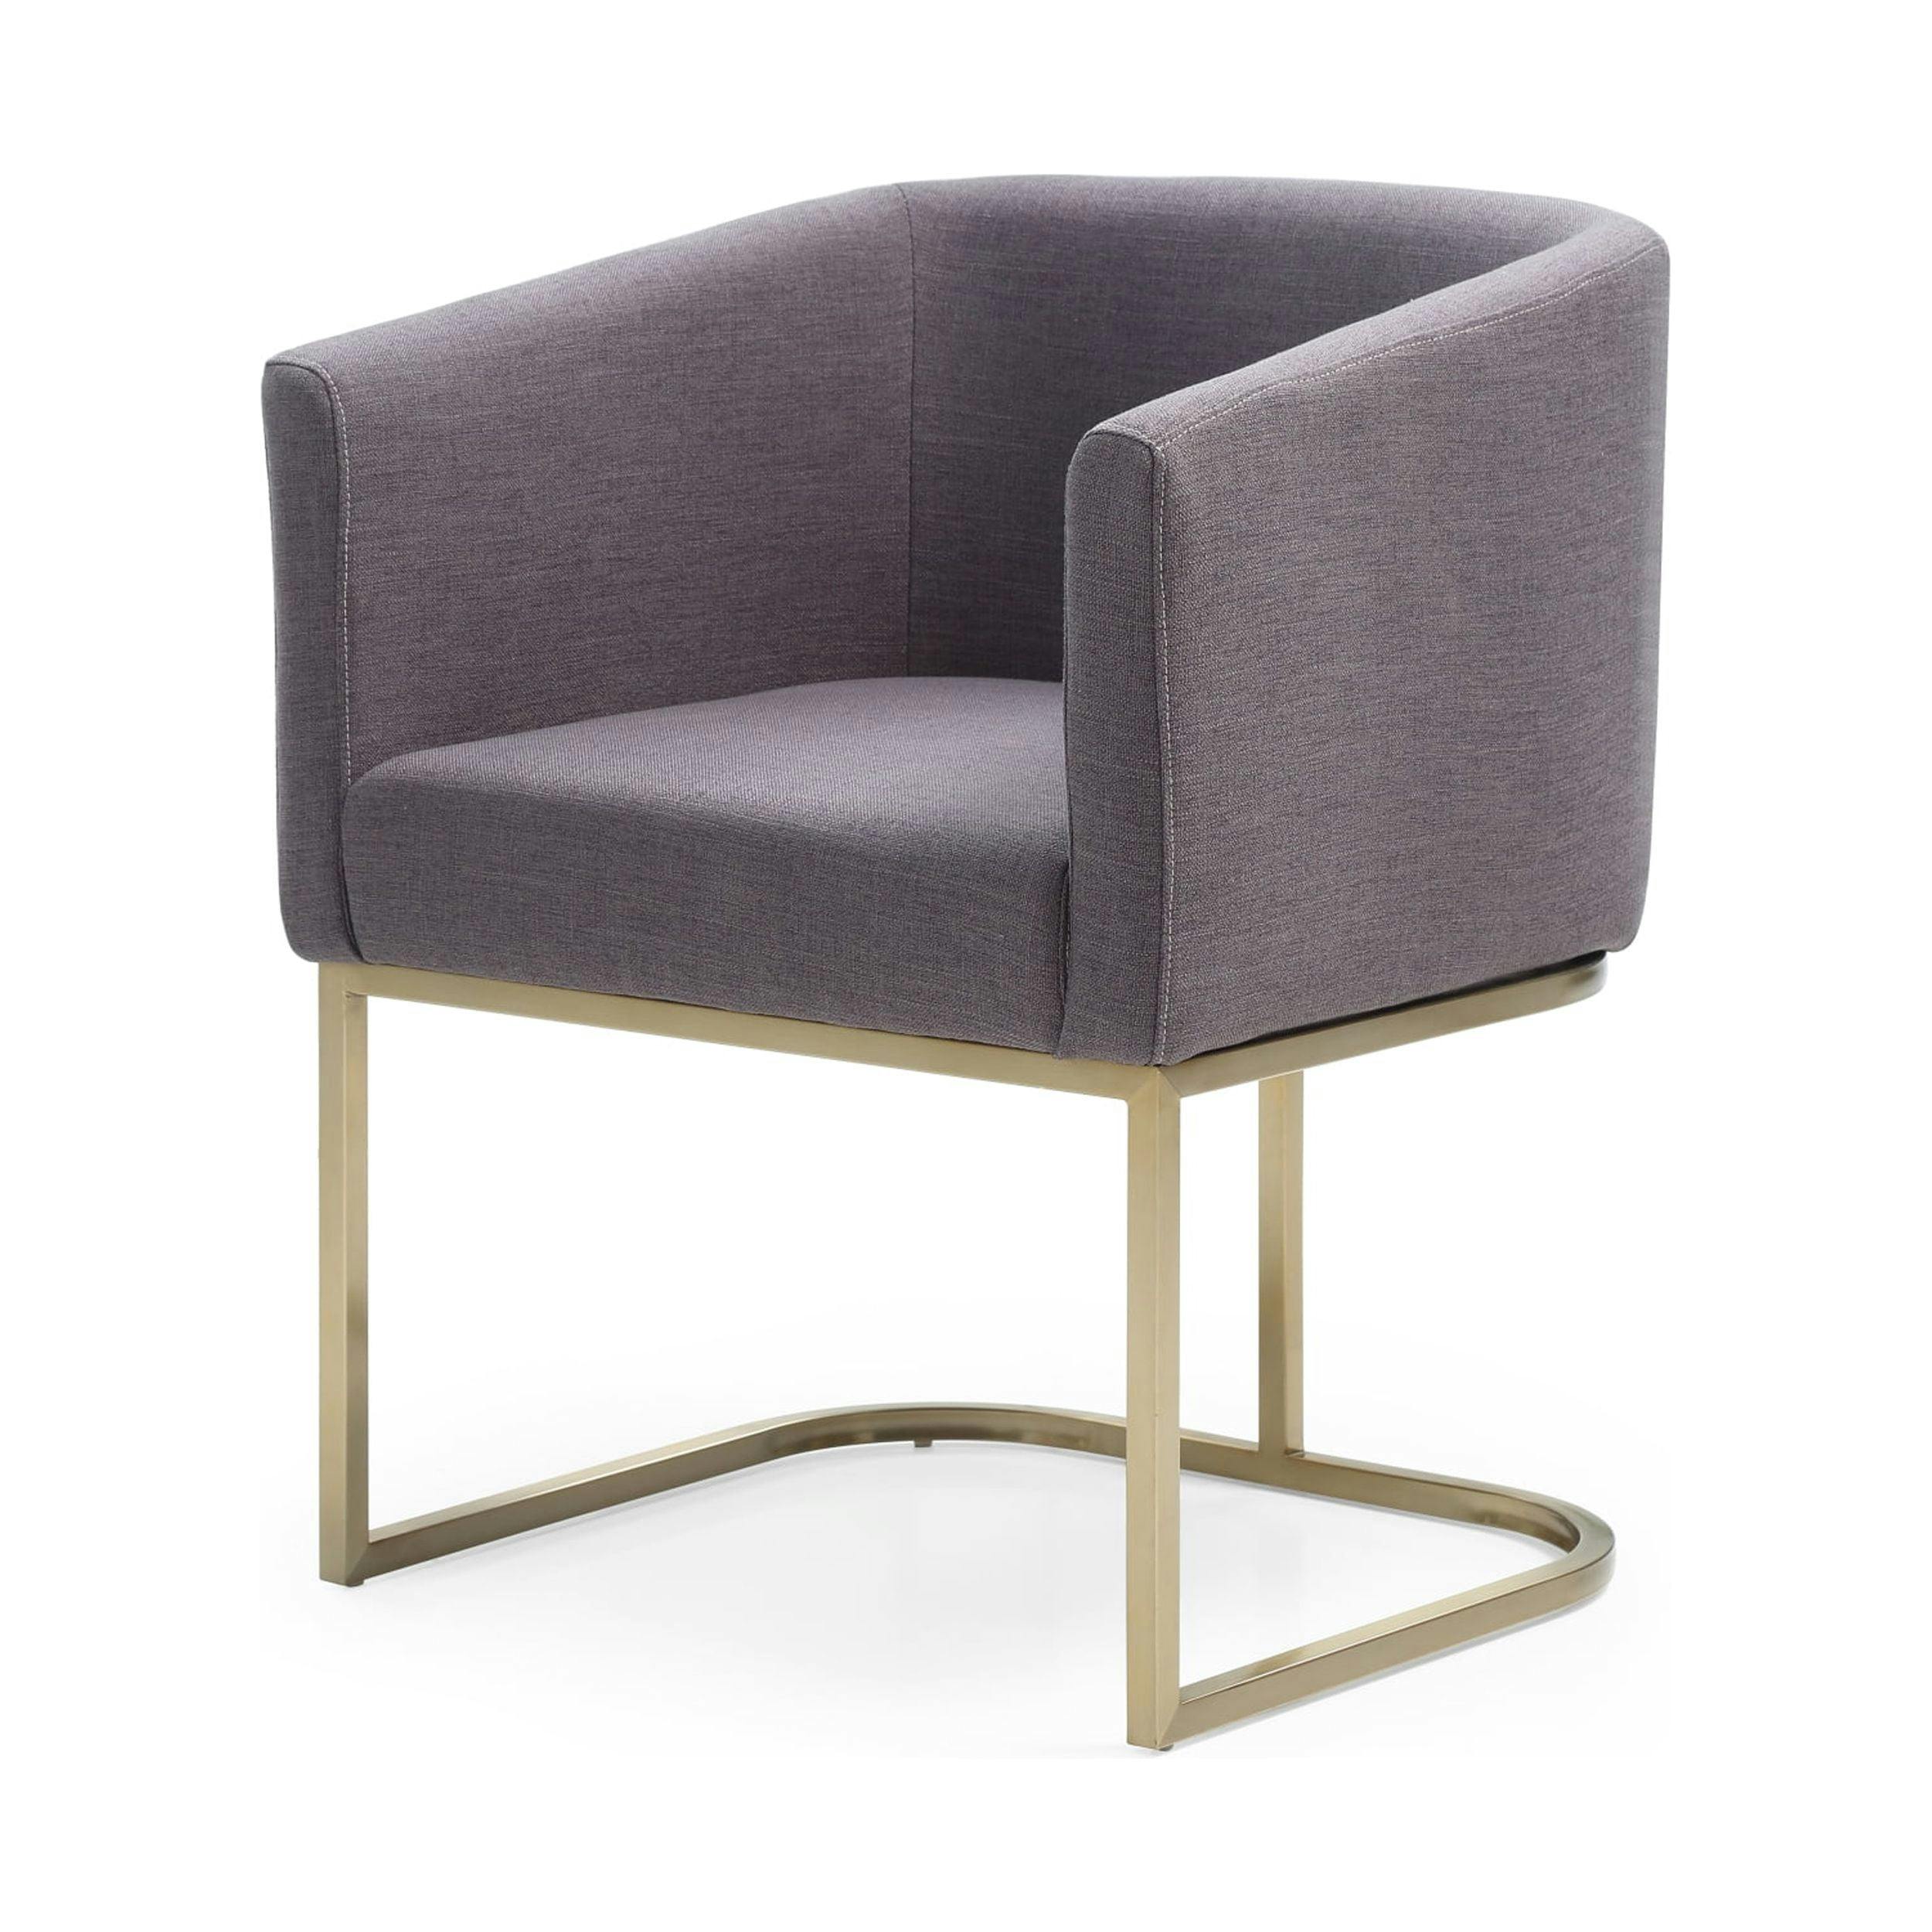 Elegant Grey Fabric Upholstered Dining Chair with Antique Brass Accents